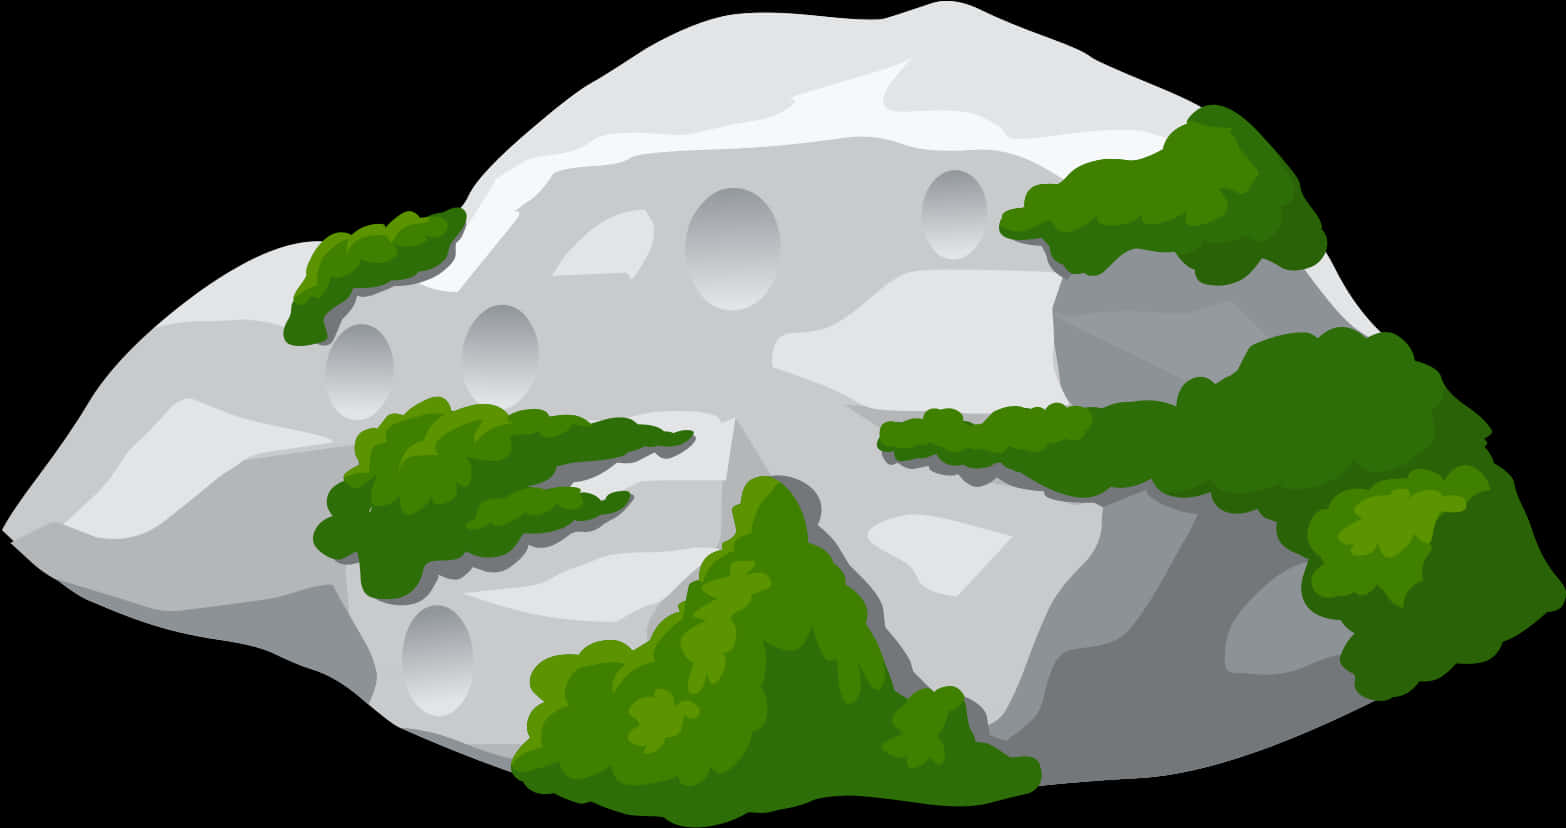 A Cartoon Of A Rock With Trees